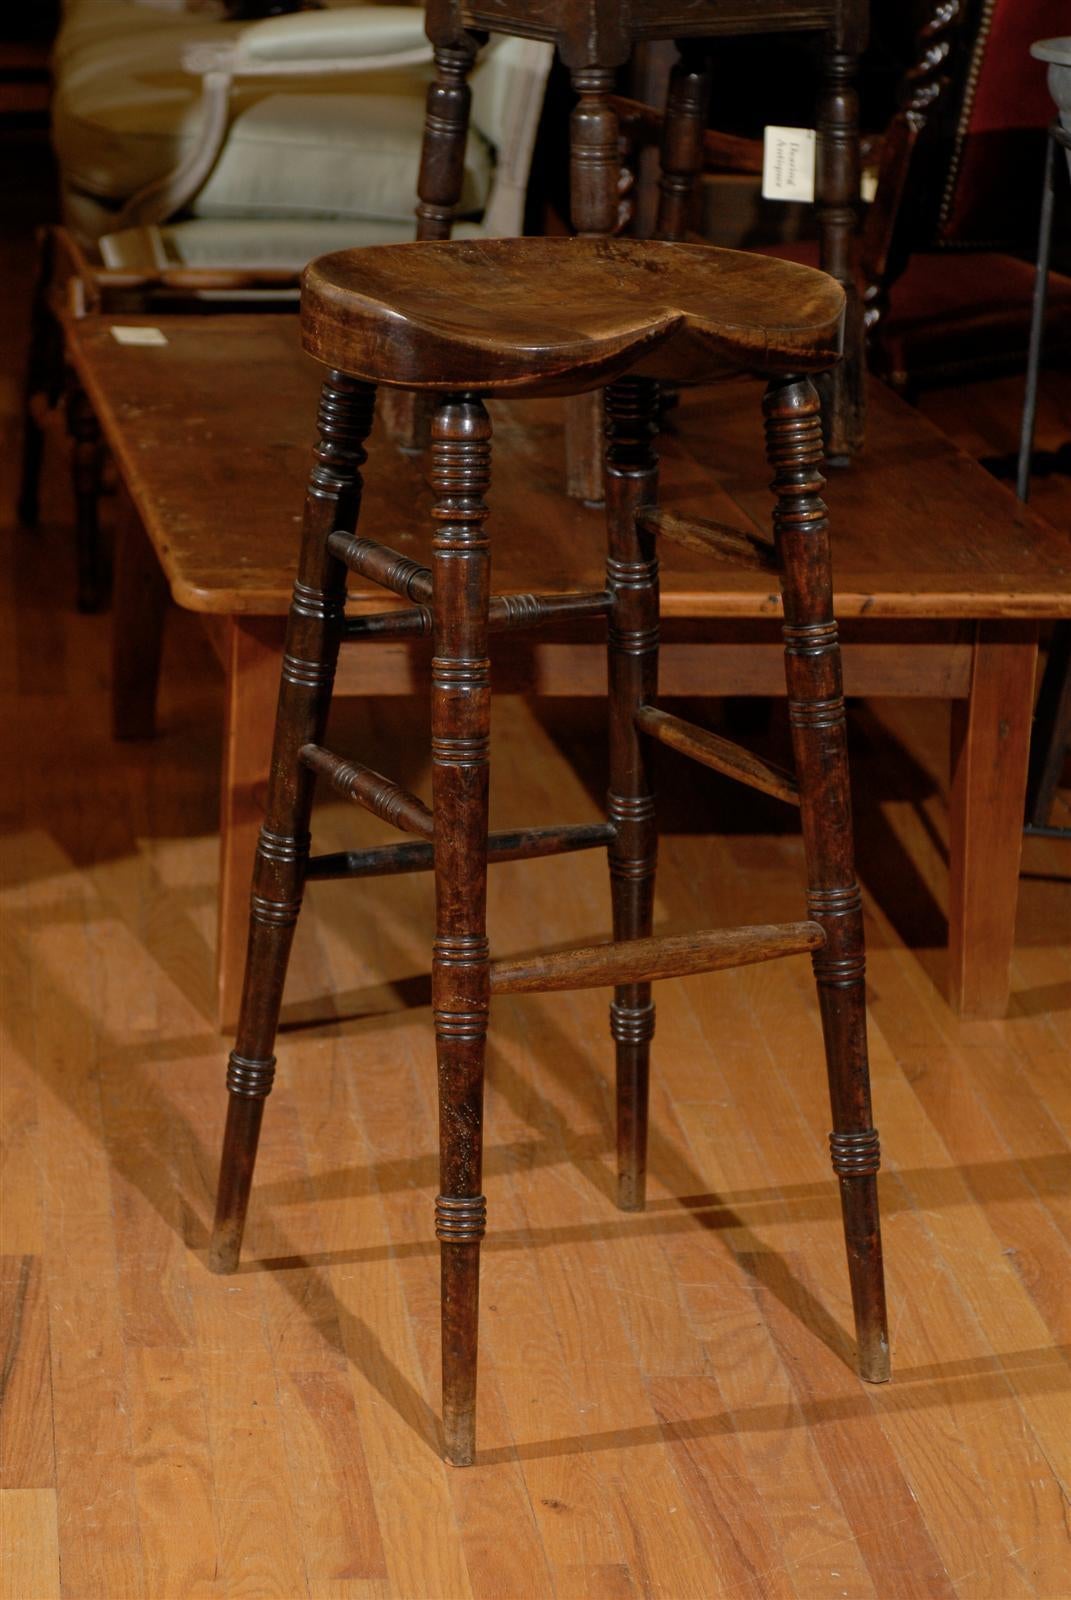 This stool has a lovely saddle shaped seat that is most comfortable. It is tall enough for a kitchen bar. The stool would look great in a room with a bar or a kitchen.